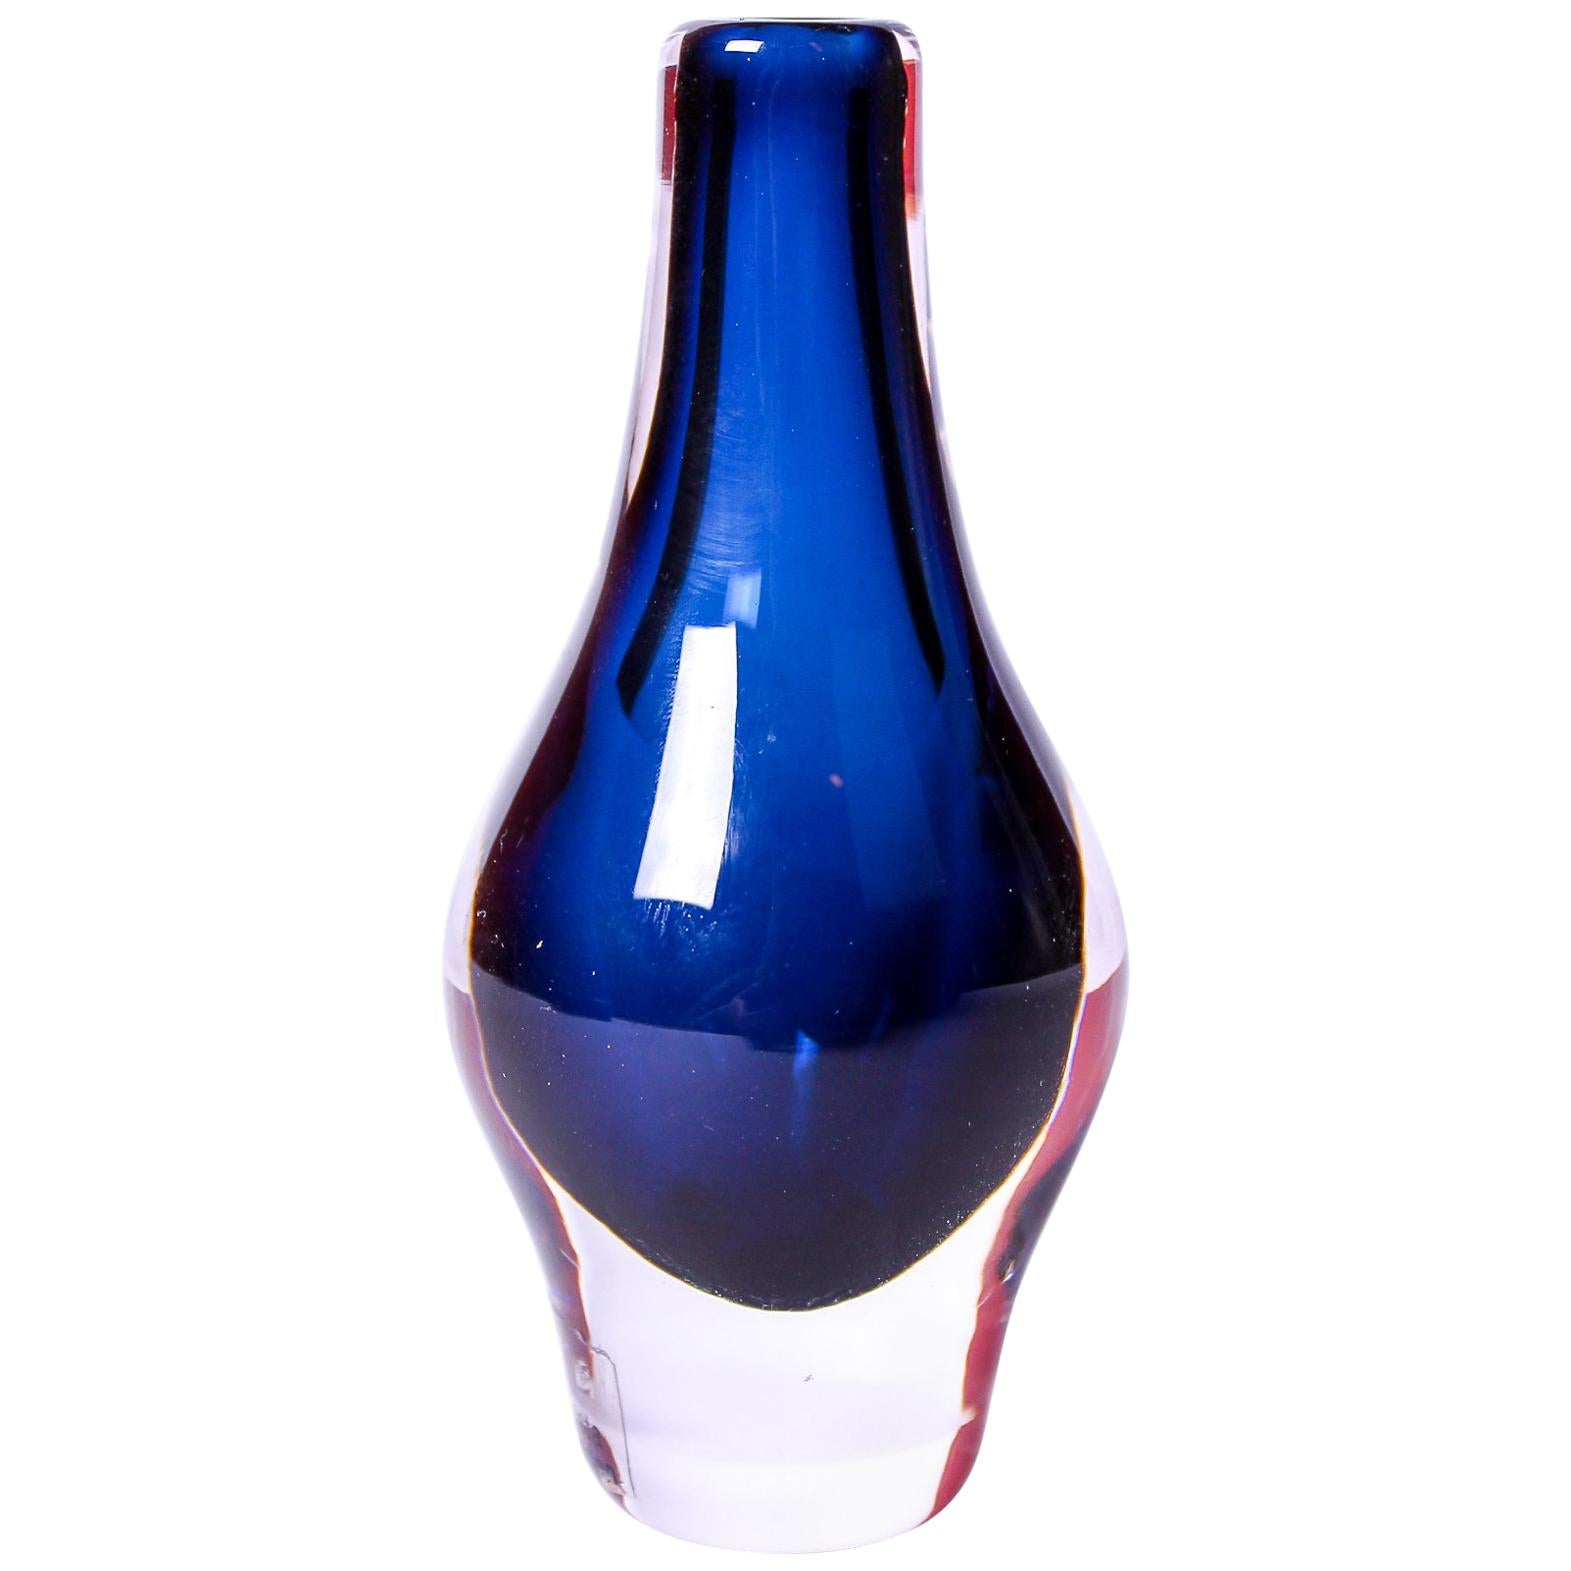 Midcentury Miniature Glass Vase by Mona Morales-Schildt for Kosta, 1950s For Sale